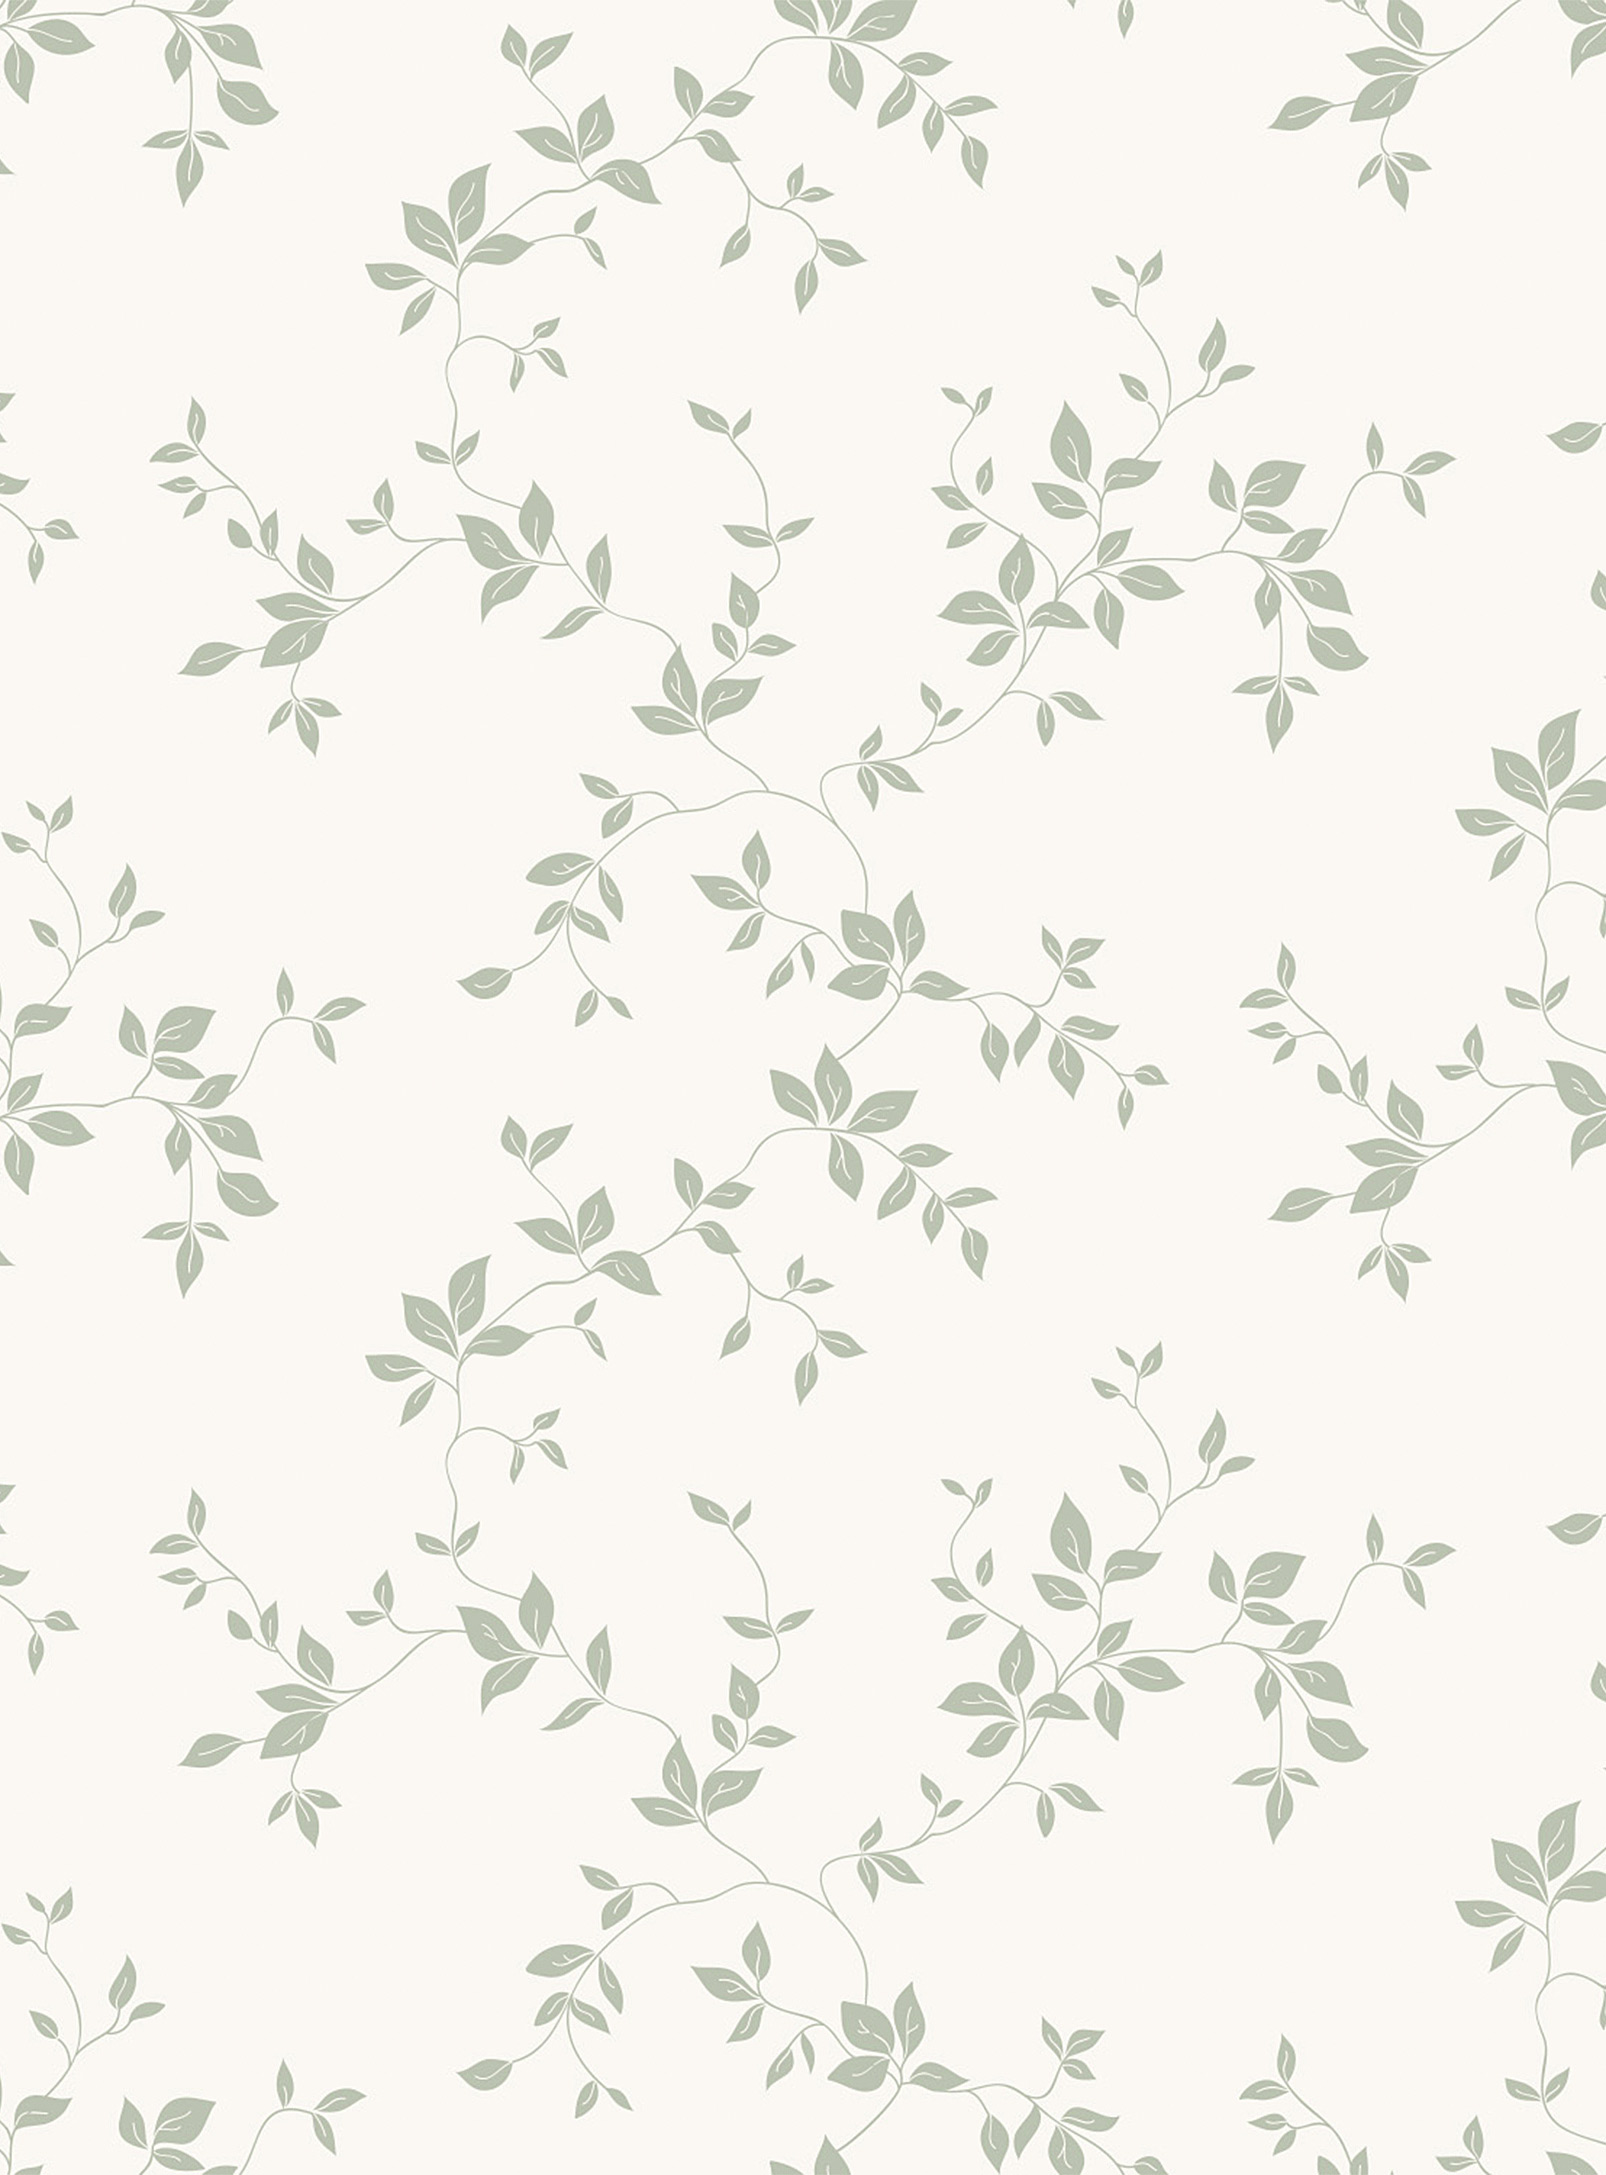 Station D Rosane Flowery Wallpaper Strip See Available Sizes In Khaki